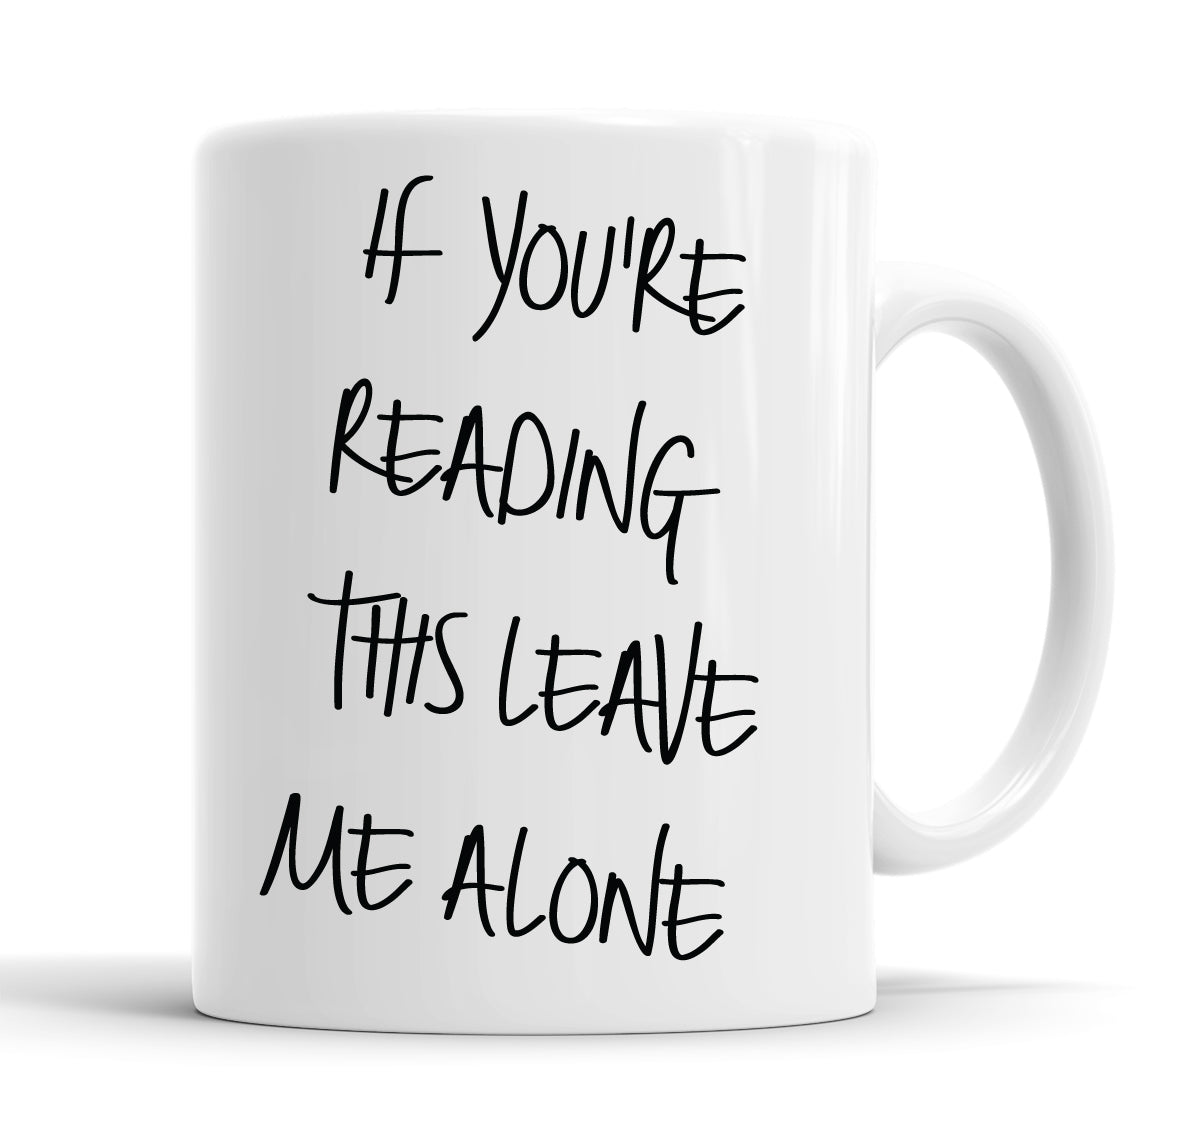 If You Are Reading This Leave Me Alone Funny Slogan Mug Tea Cup Coffee